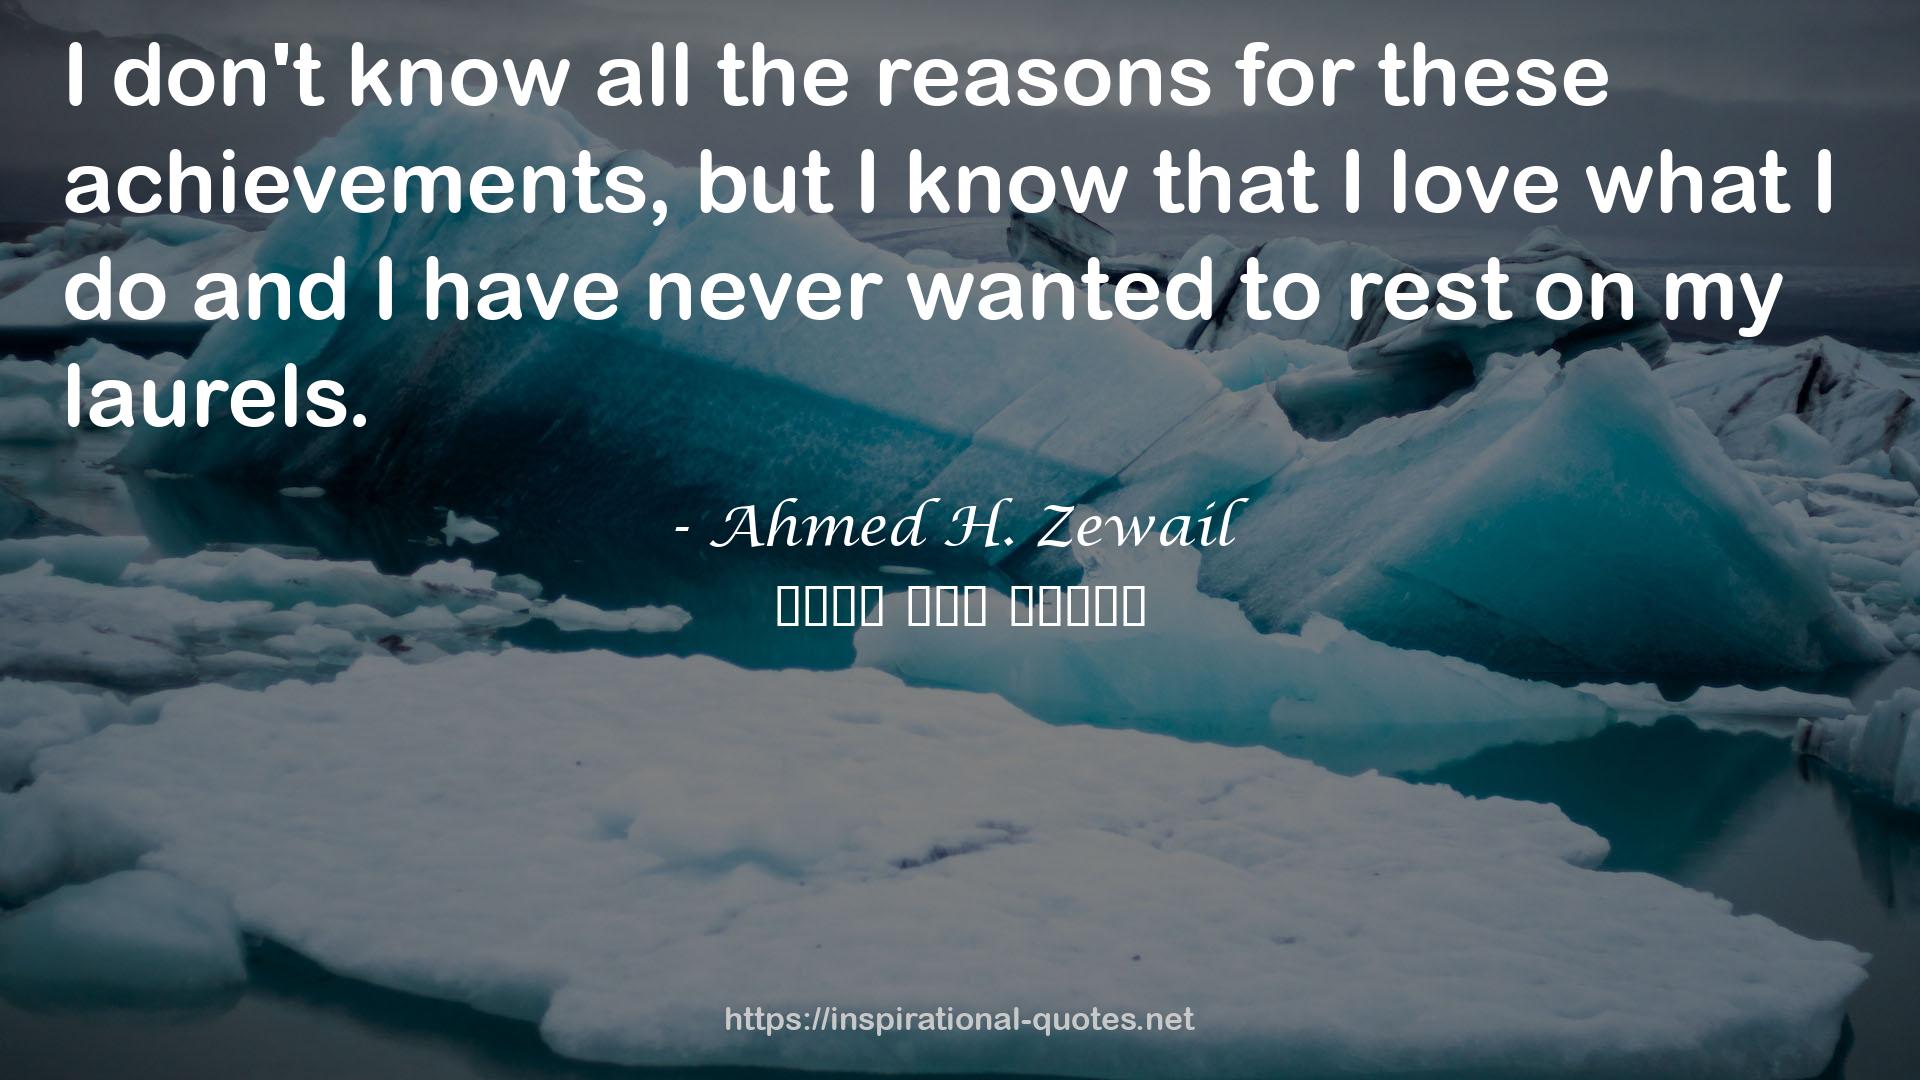 Ahmed H. Zewail QUOTES